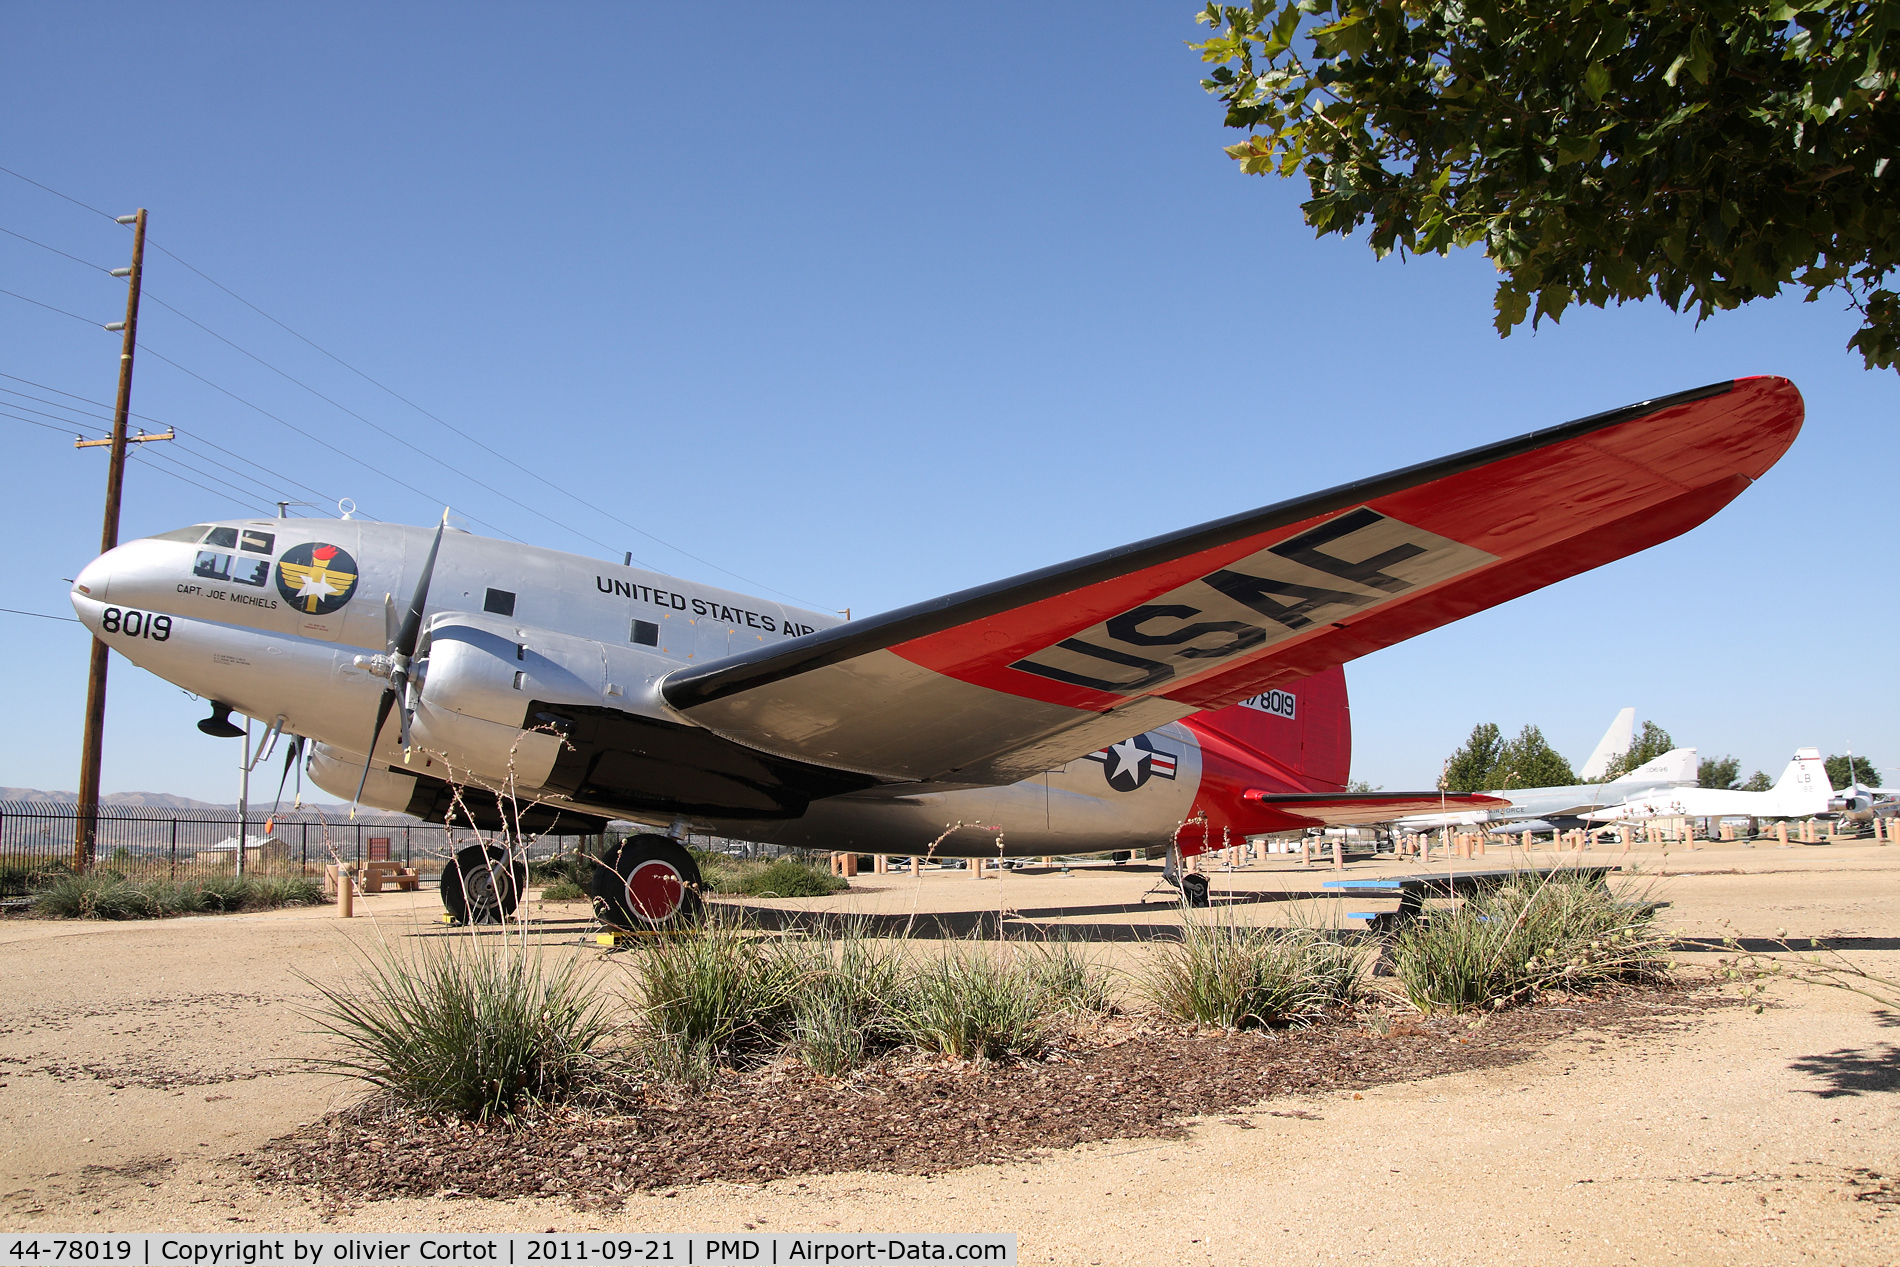 44-78019, 1945 Curtiss C-46D-15-CU Commando C/N 33415, recently restored and painted